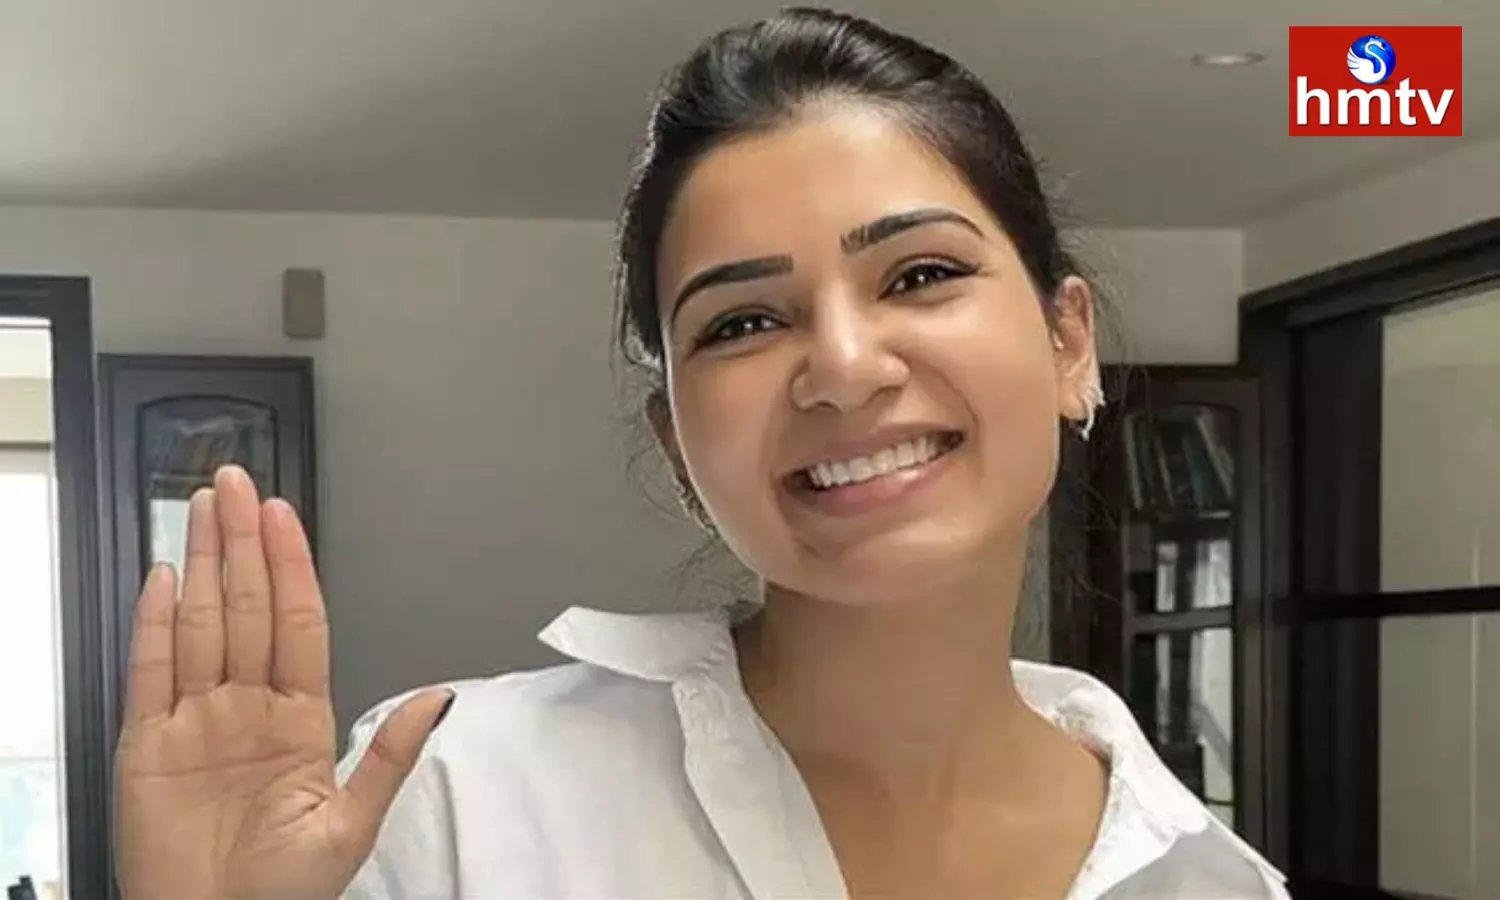 Samantha Reacted Strongly to the Rumours